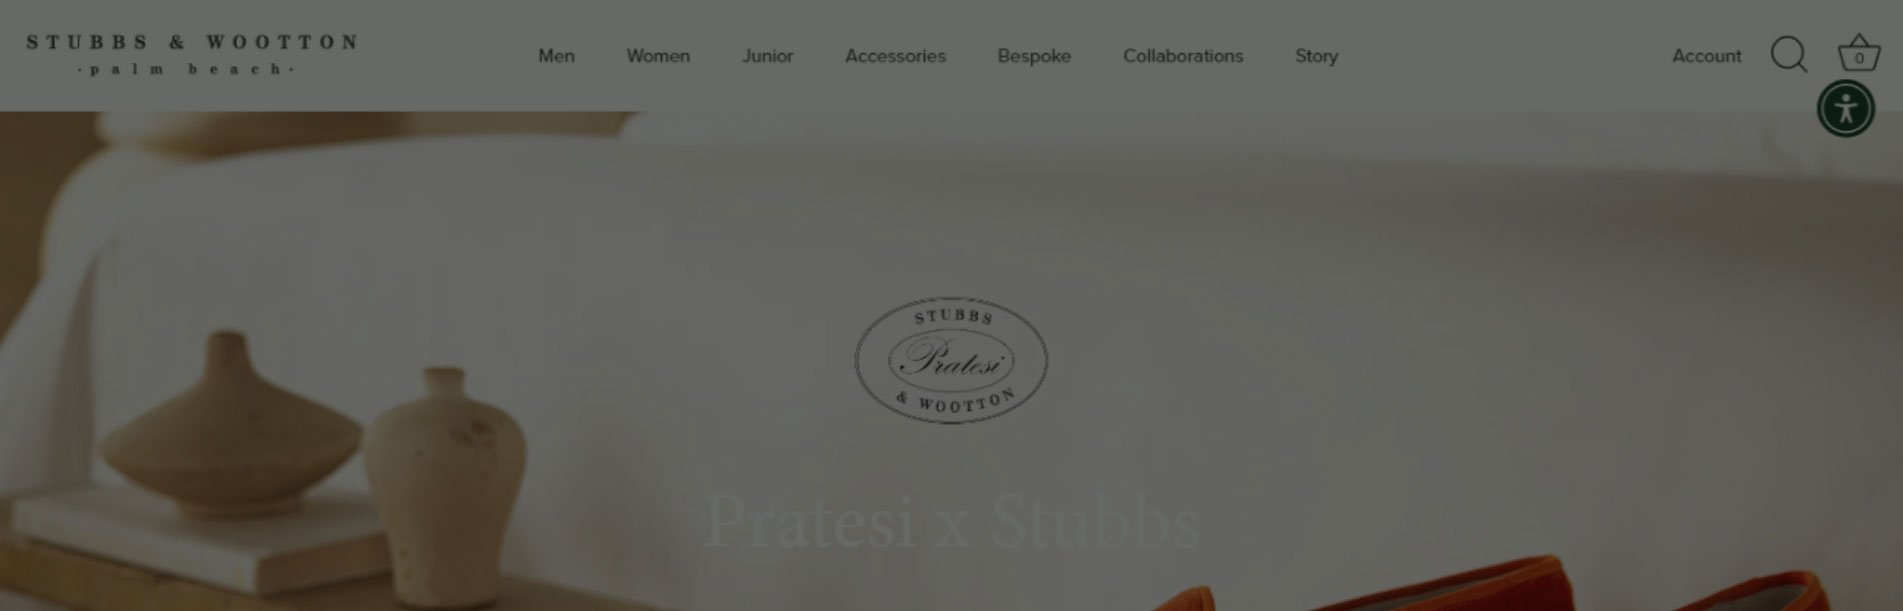 Stubbs and Wootton, Fashion Industry Email Marketing Banner